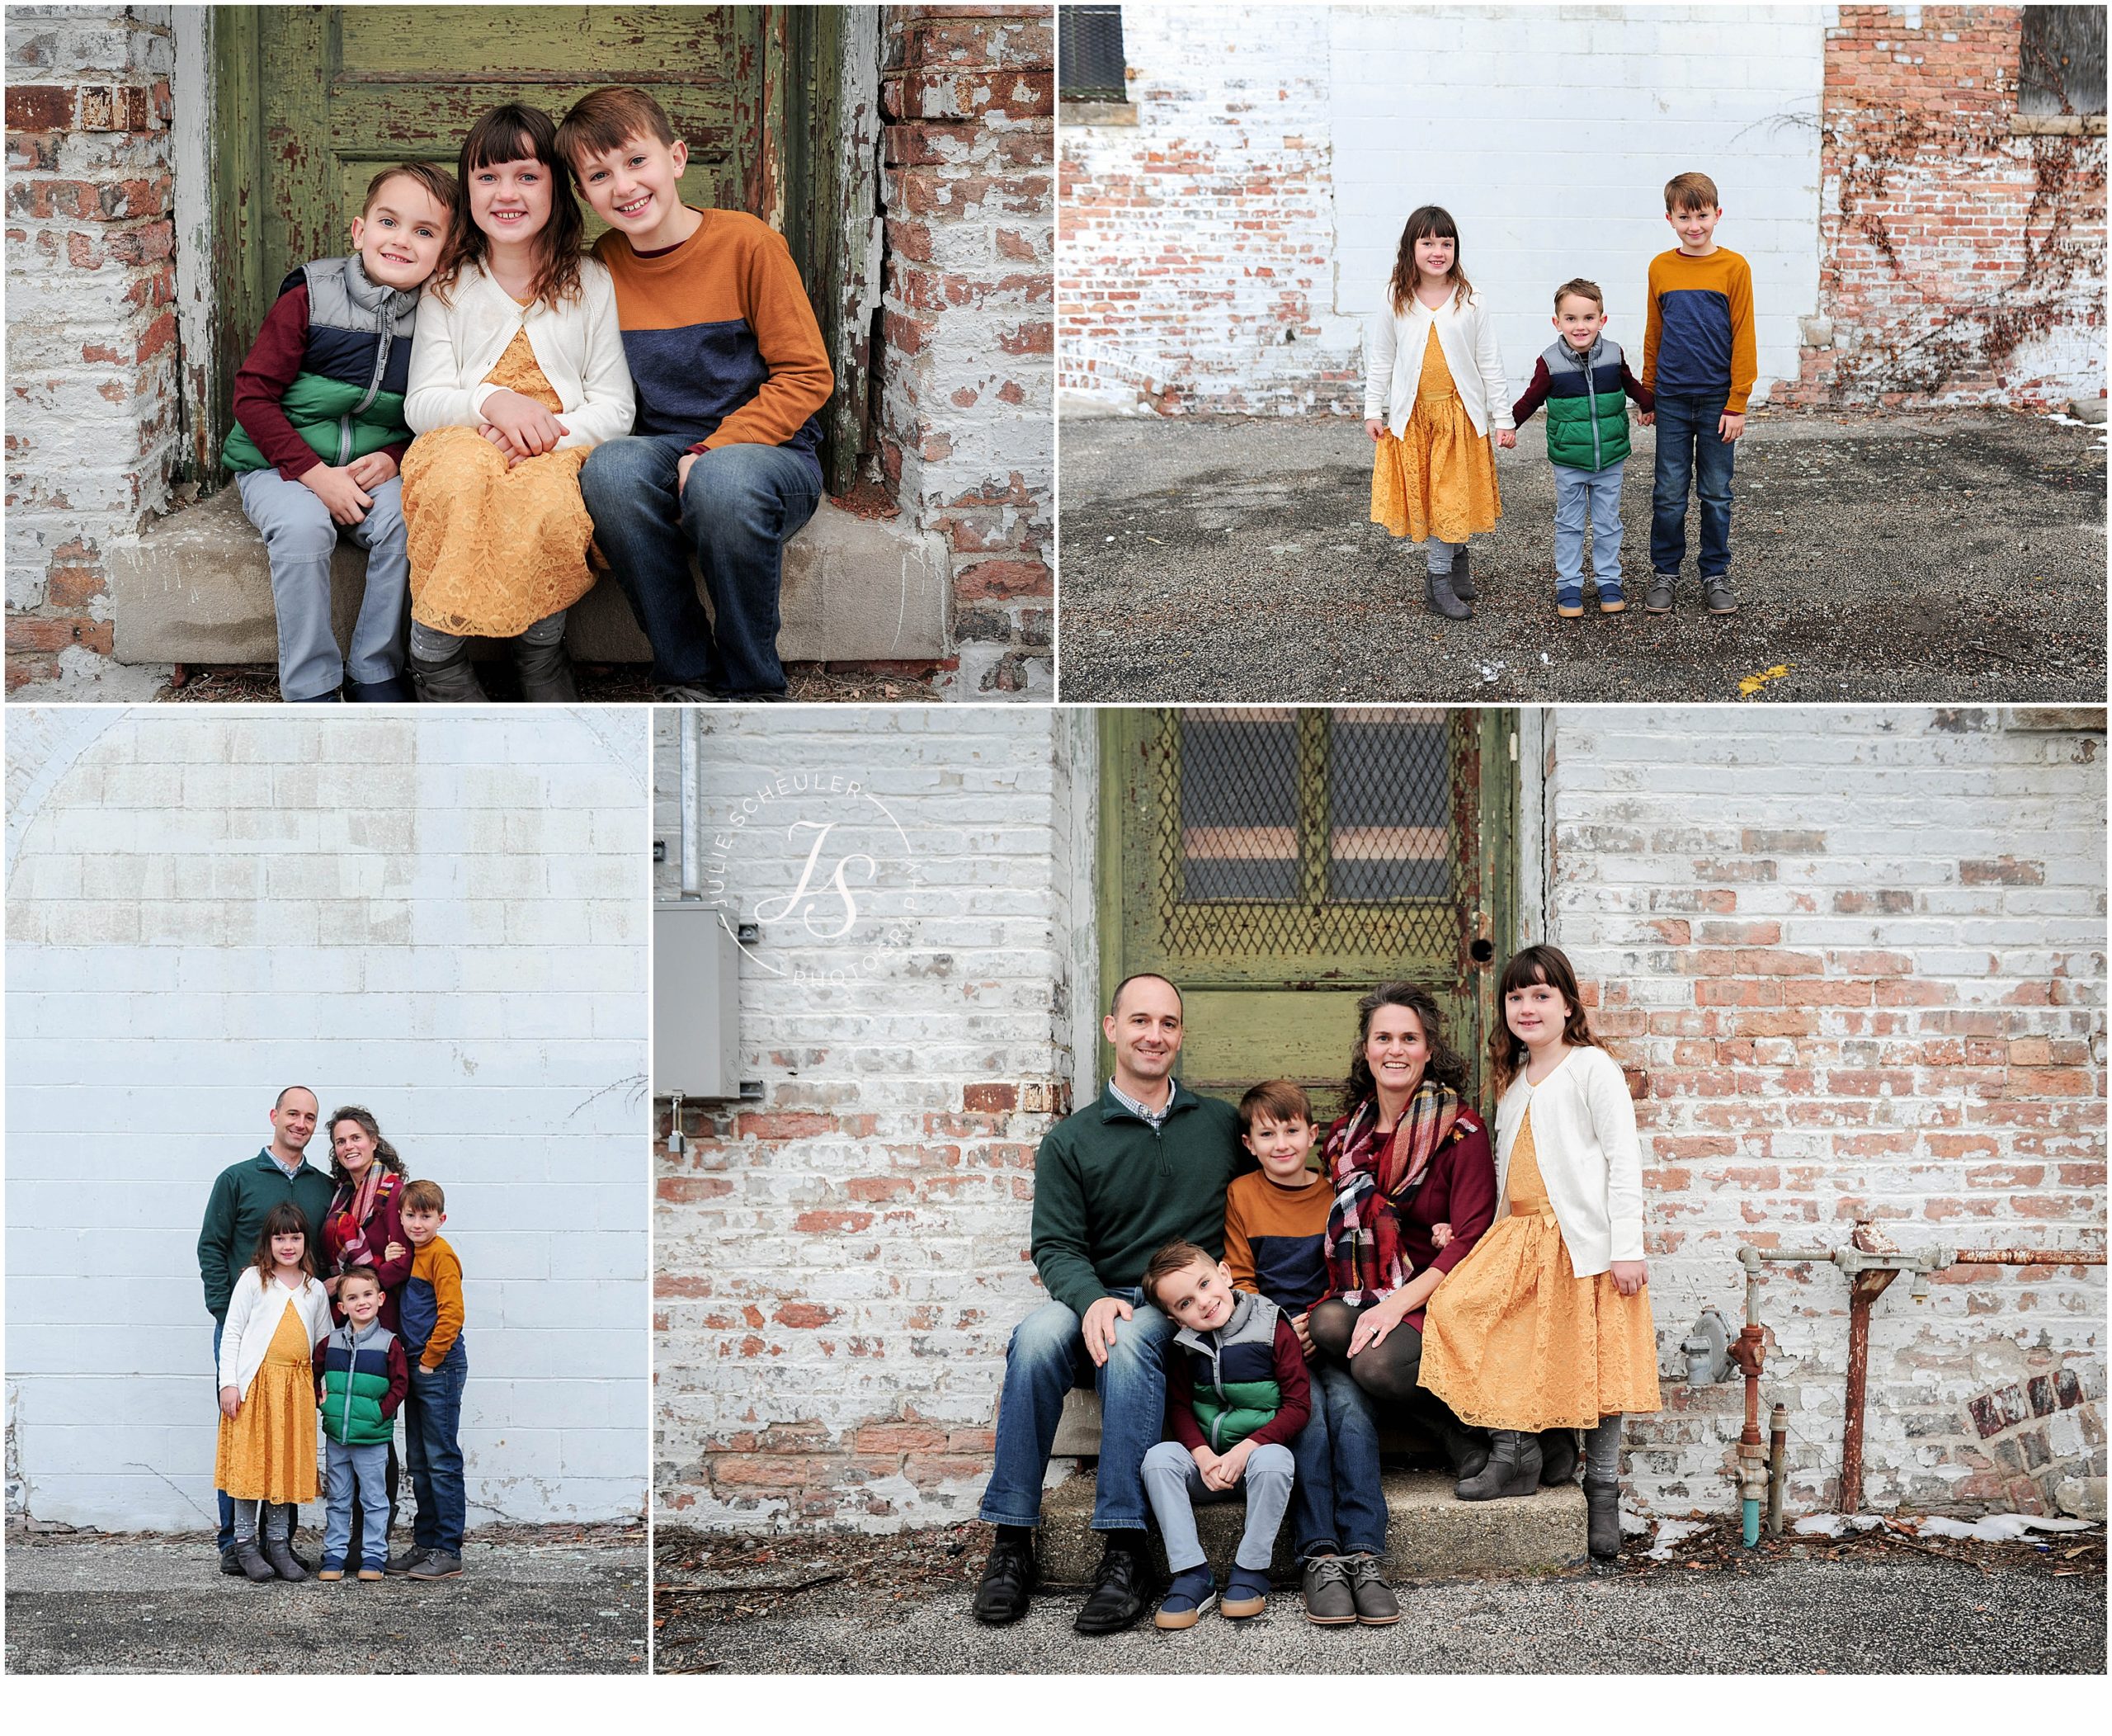 Sweet Family and Kiddos in Downtown Decatur, IL